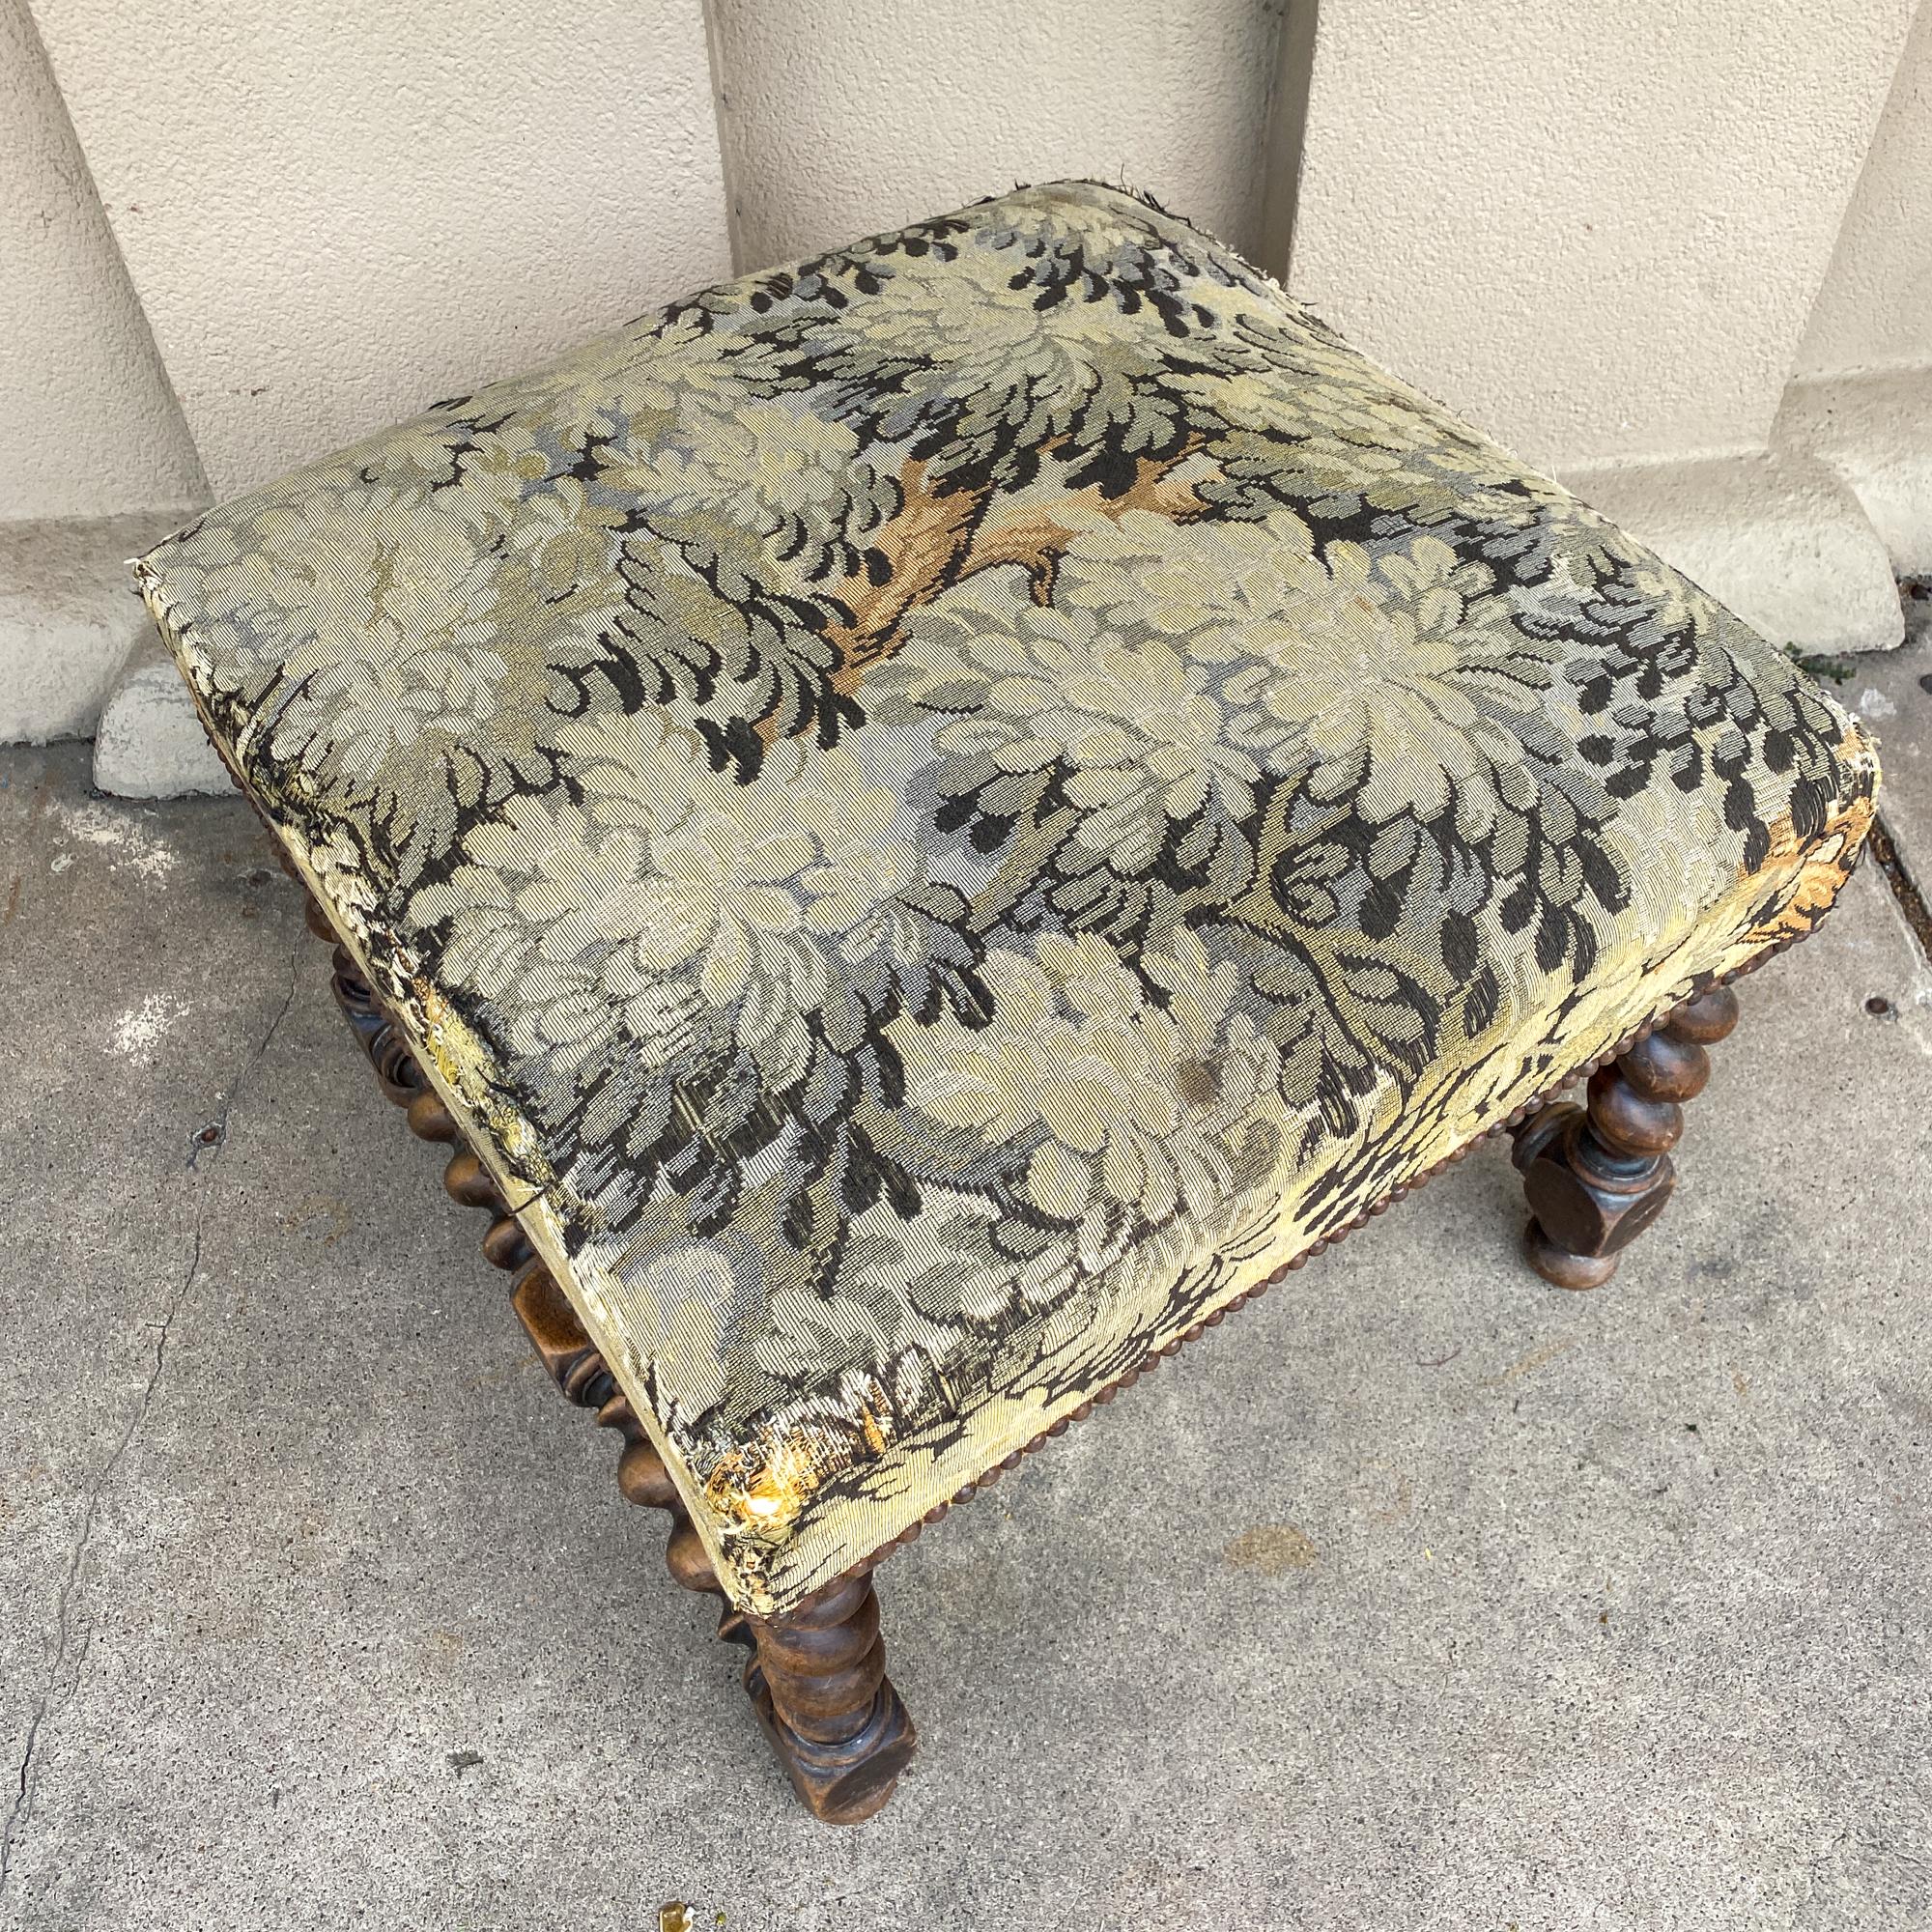 This antique French ottoman has several interesting details. The base is crafted of oak in a barley twist style with four twist legs joined at the sides and center with coordinating supports. The top of this piece is upholstered with an embroidered